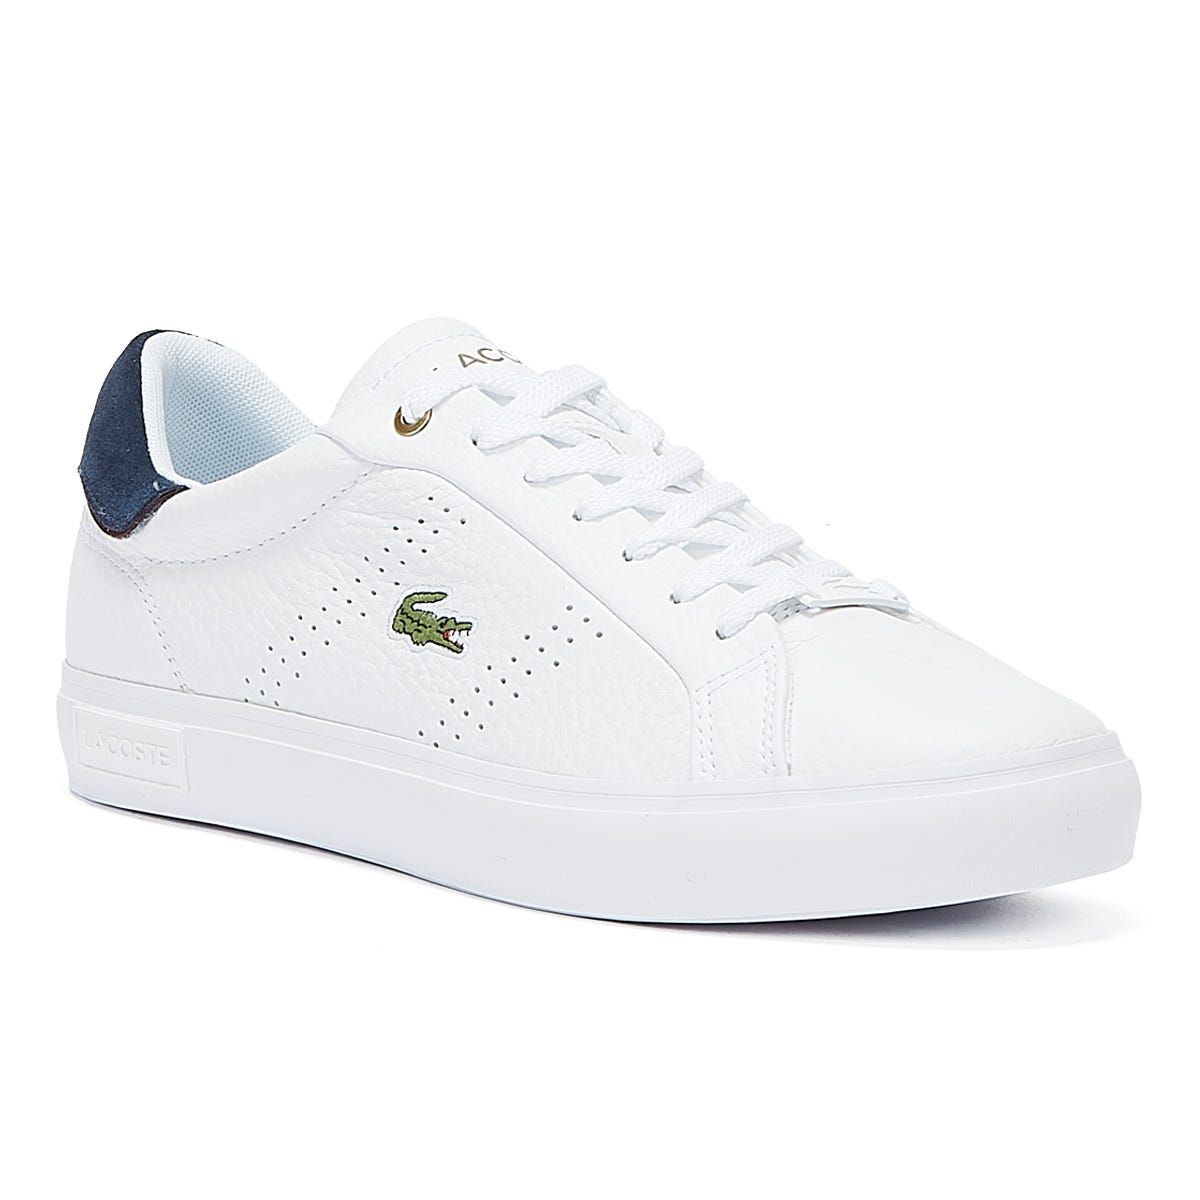 Lacoste Powercourt 2.0 Mens White / Navy Trainers